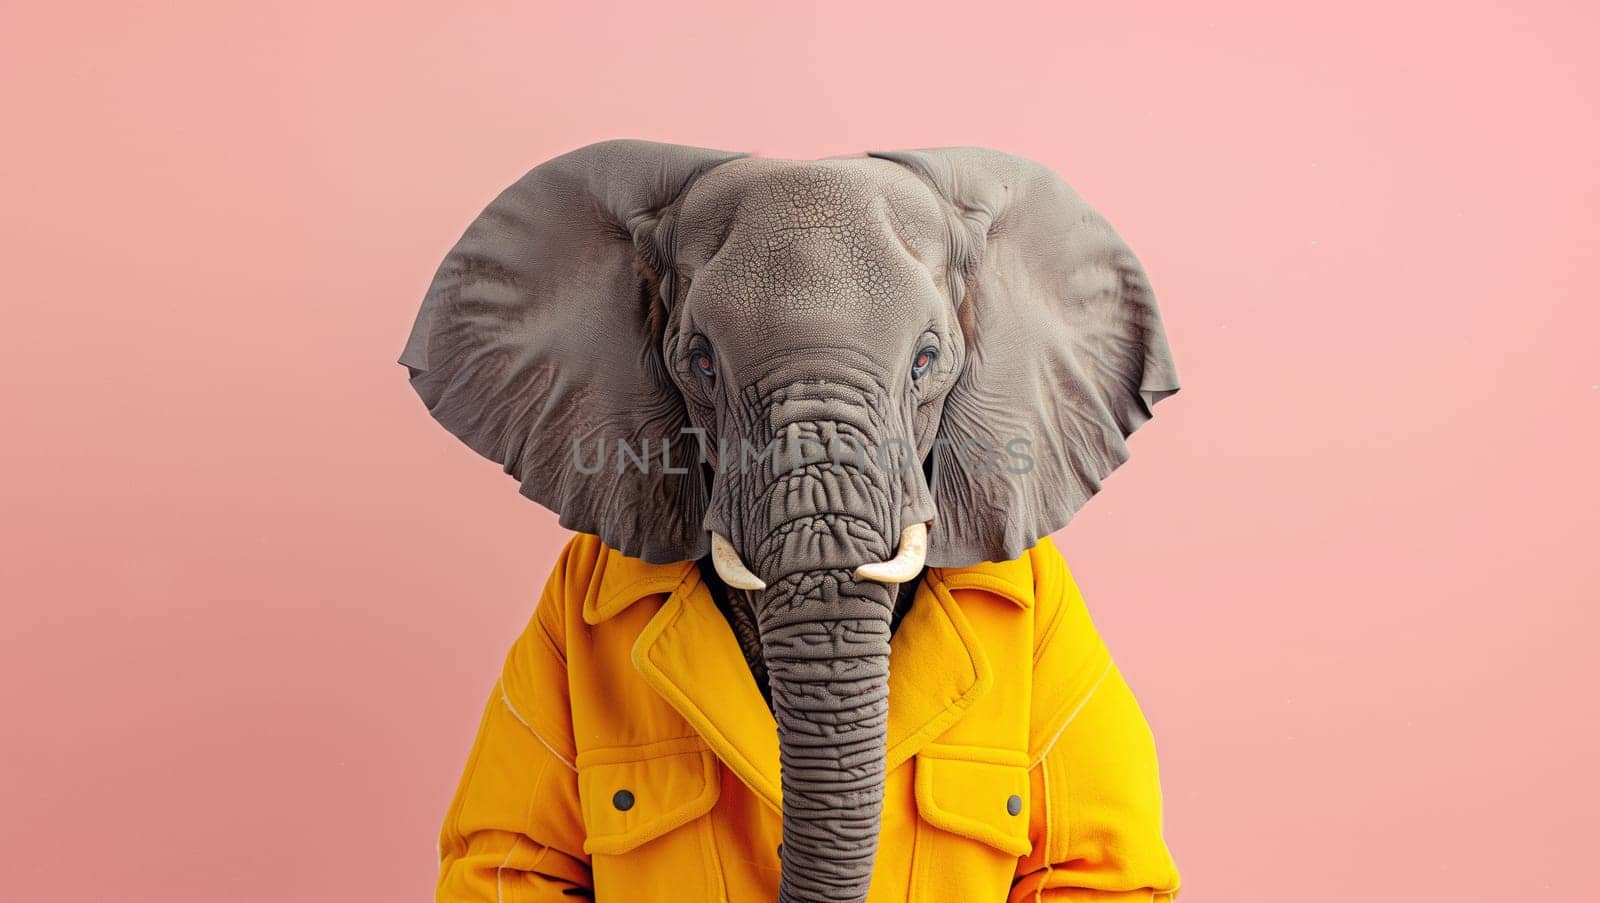 Portrait of stylish funny elephant in yellow suit on a pink background, animal, creative concept by Rohappy